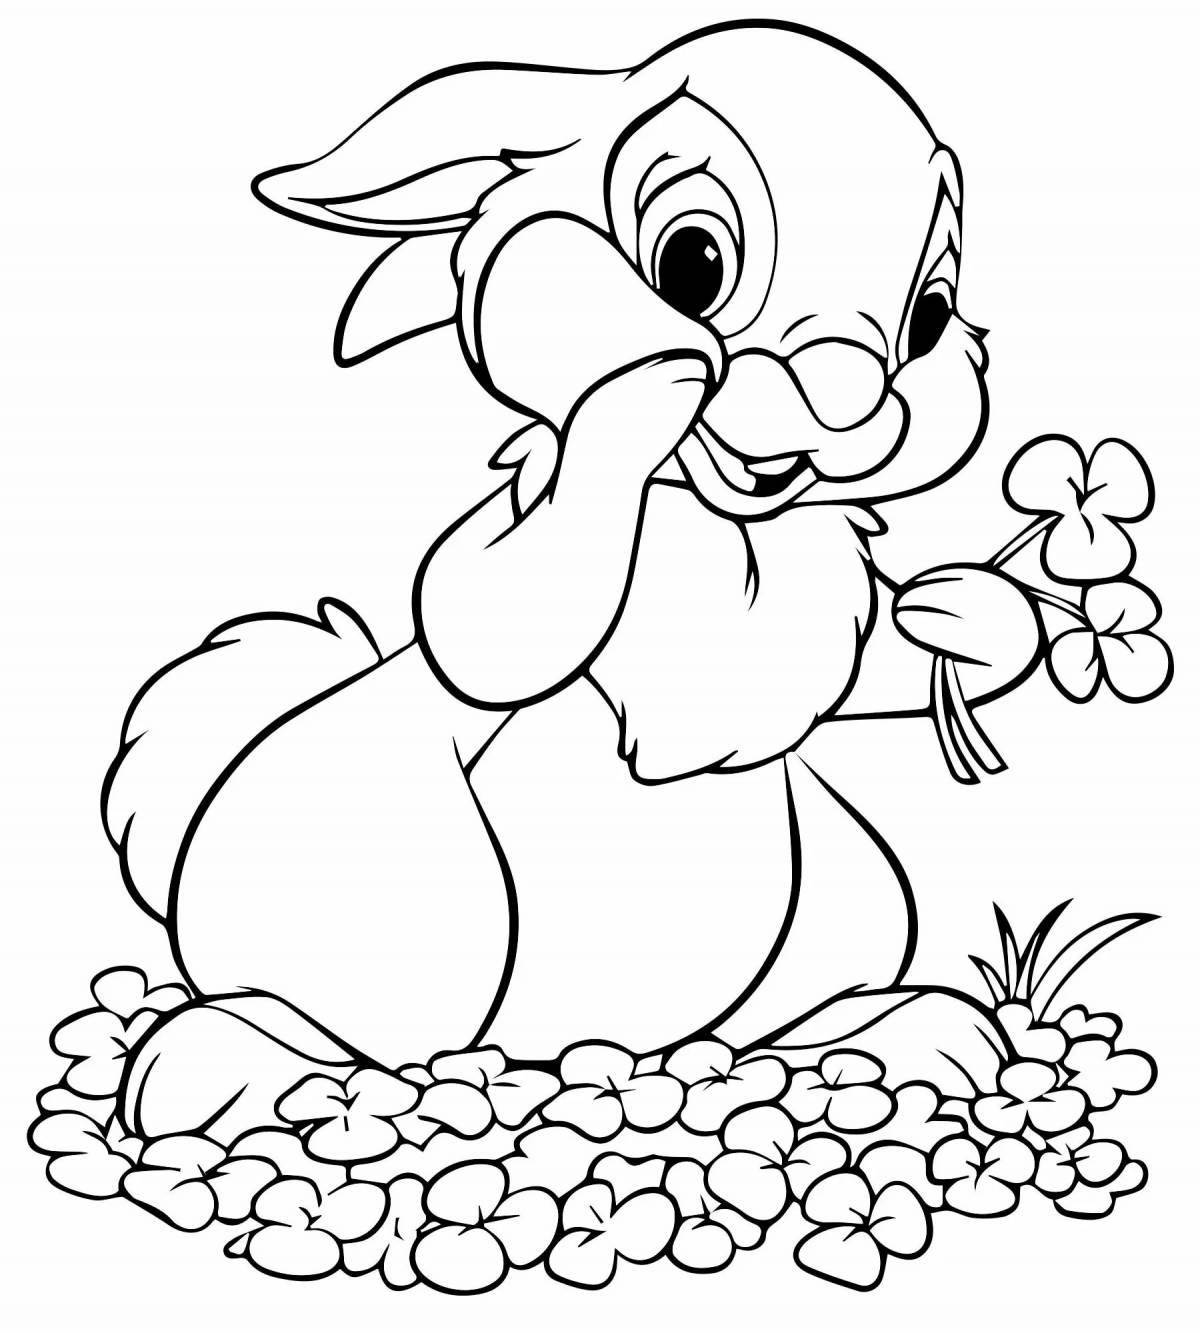 Witty rabbit coloring book for kids